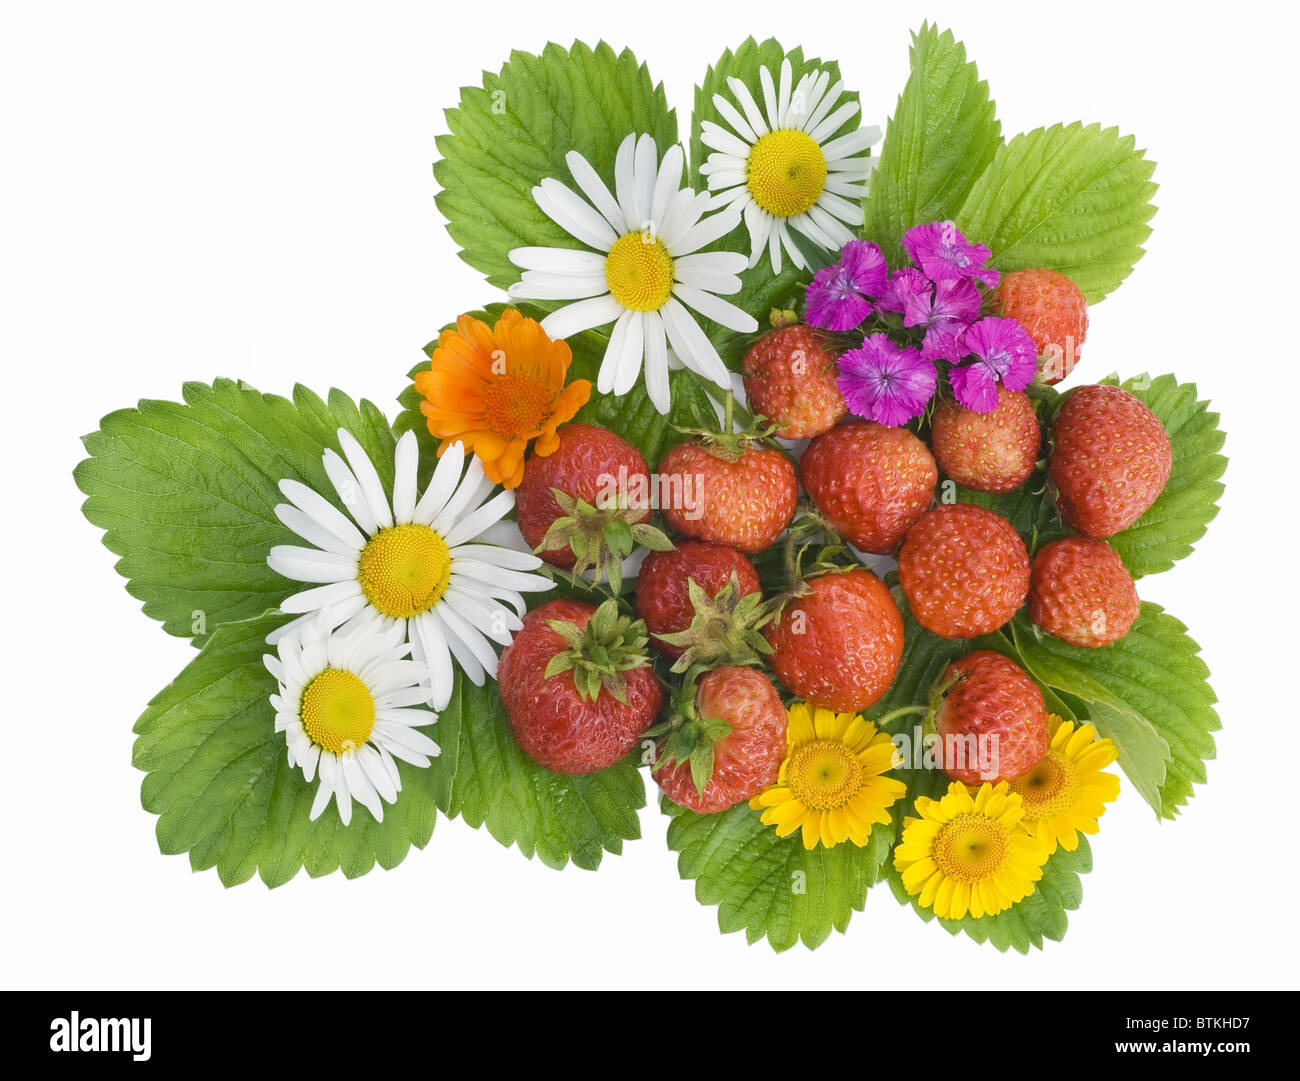 Garden strawberry and flowers mix Stock Photo